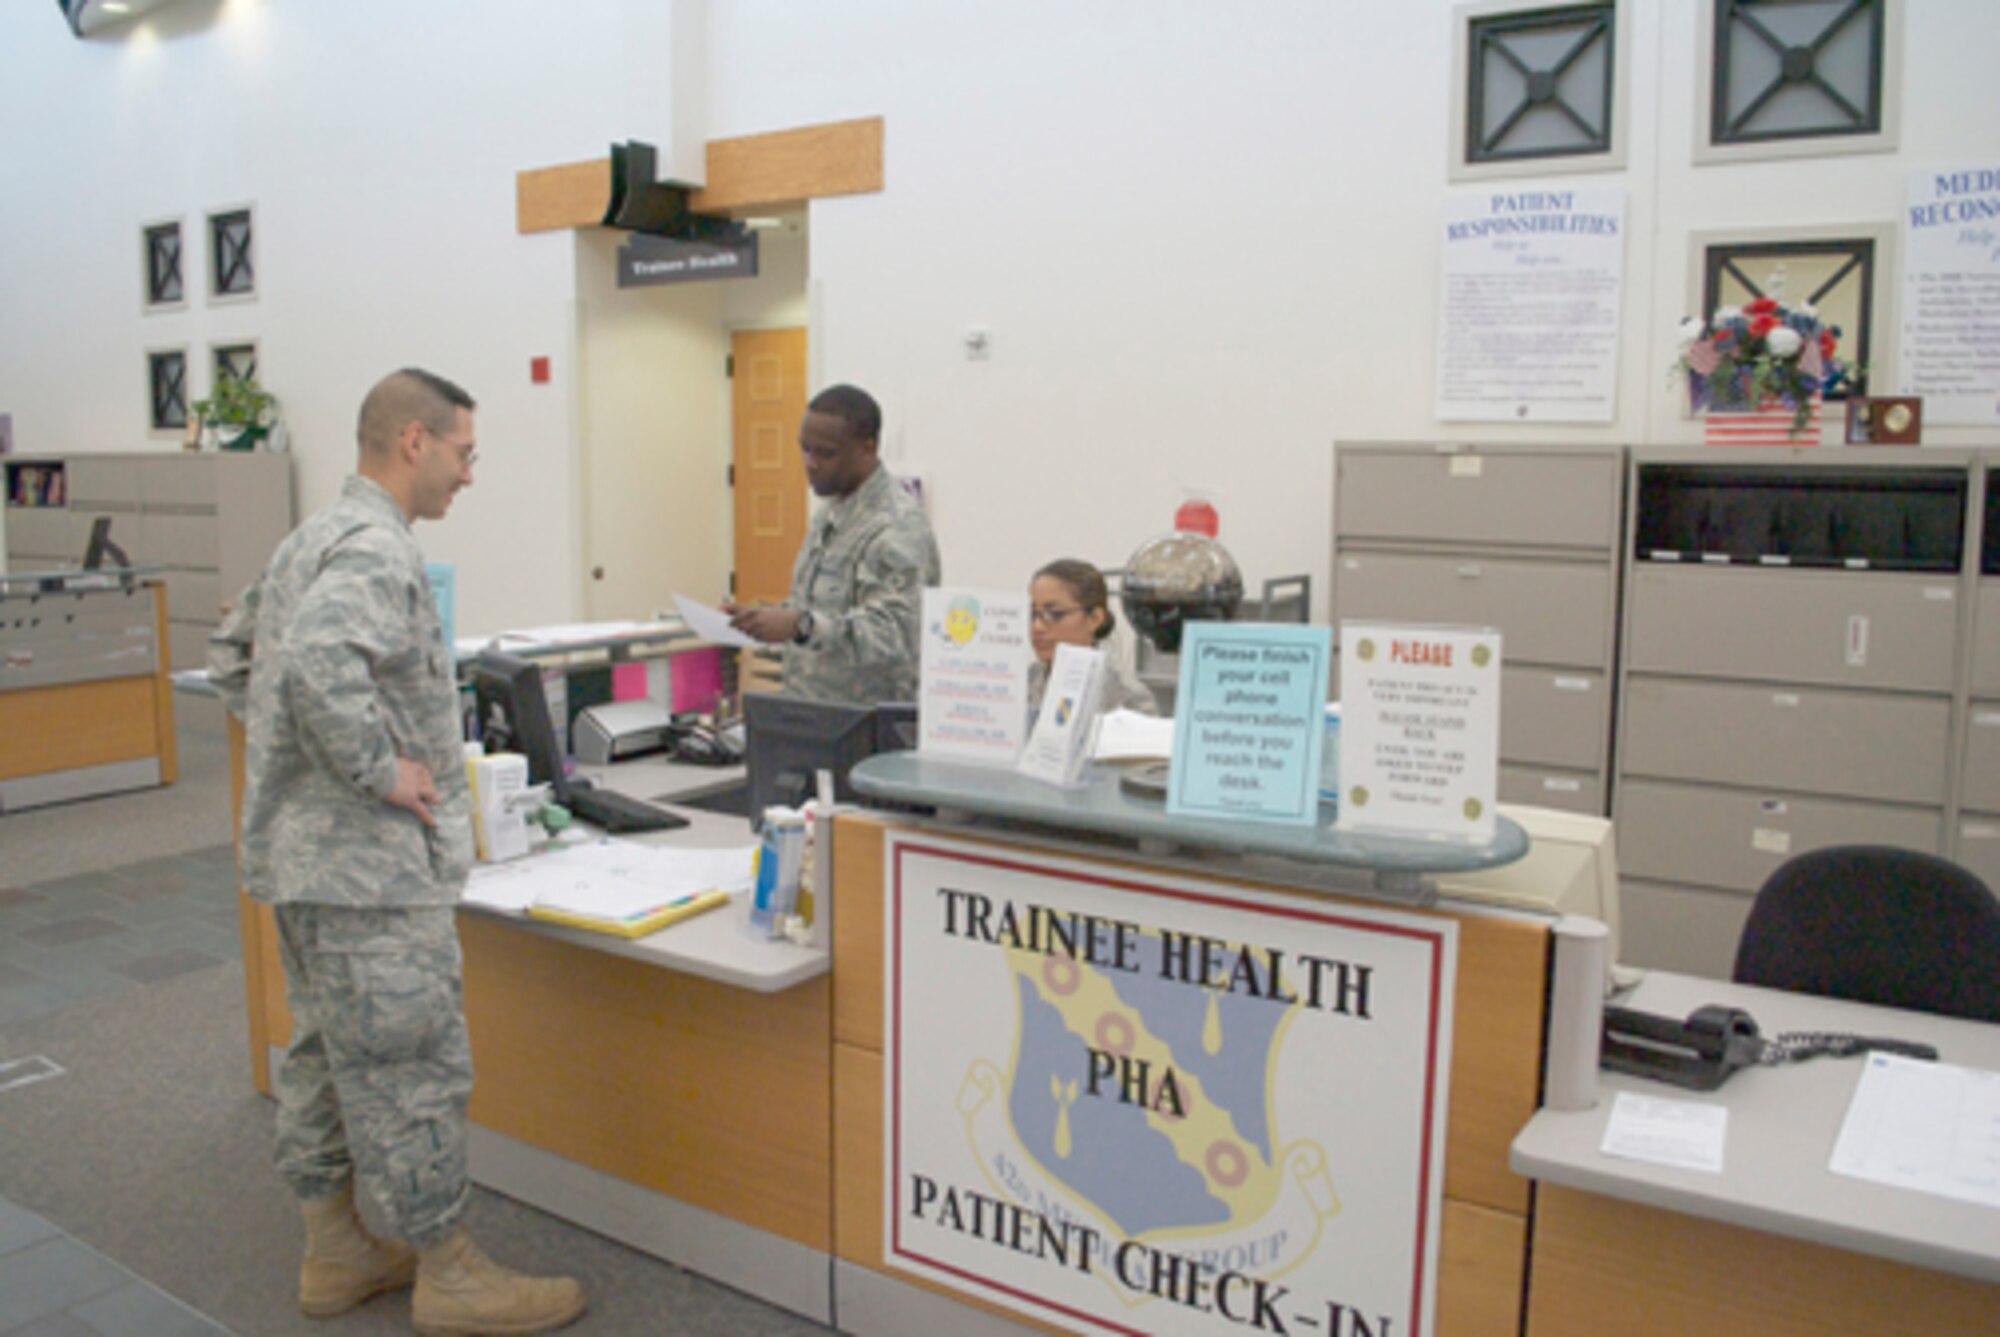 The trainee health clinic is open for temporary duty students 7 - 9 a.m. during normal duty hours. (Air Force photo/Christopher Kratzer)